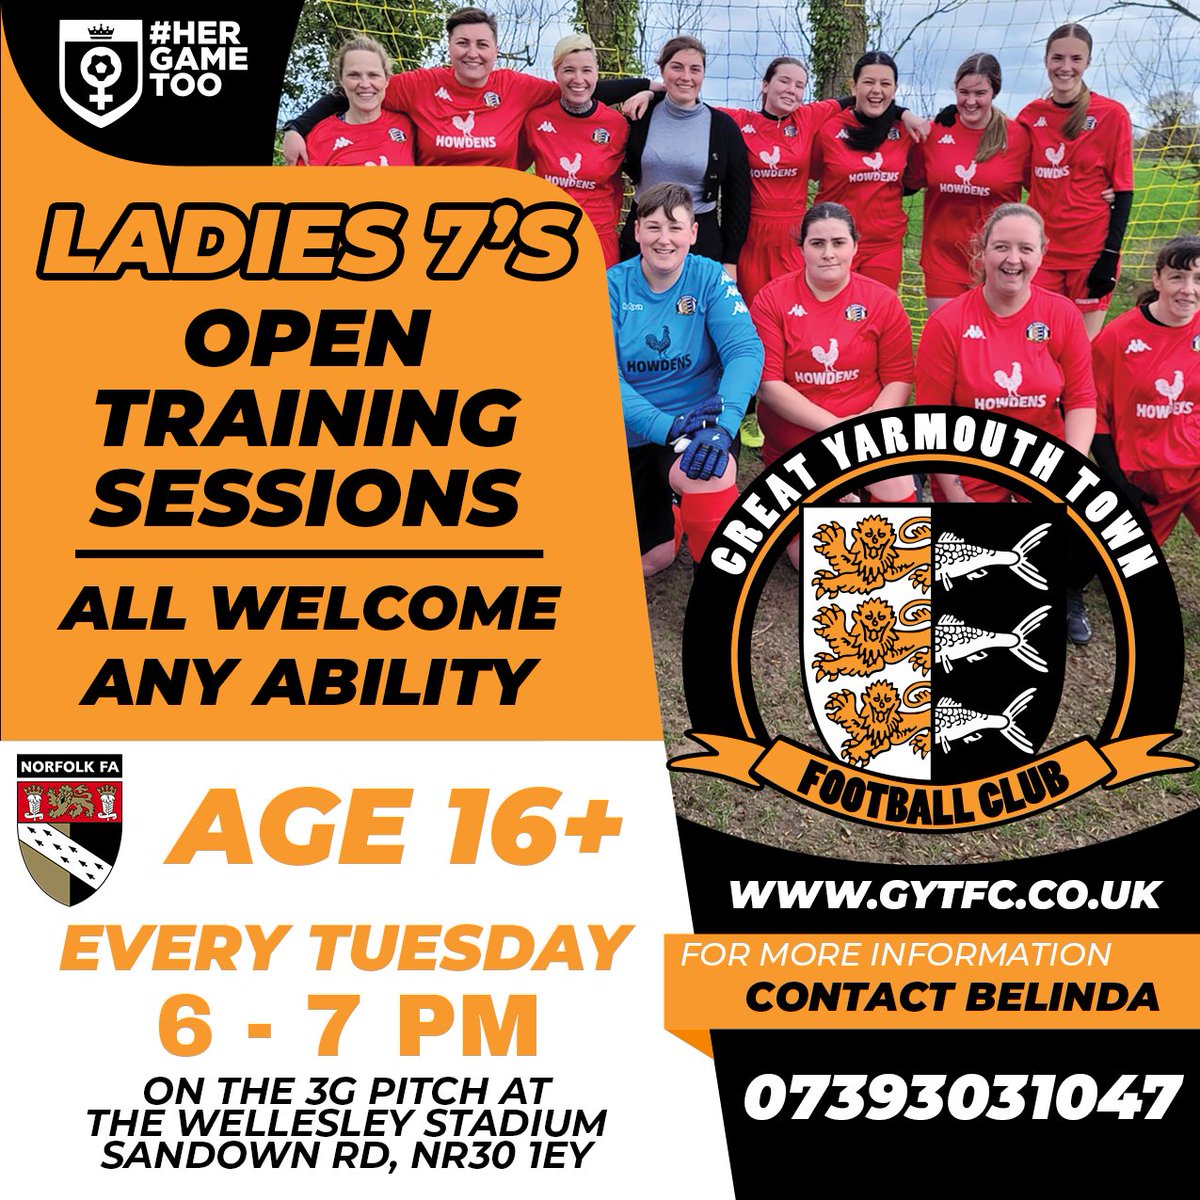 Our Ladies 7's team is holding OPEN TRAINING SESSIONS! No matter what your experience or ability, we welcome all ladies aged 16+ to come and give football a try! Our sessions are all about: Having fun and making new friends! Learning new skills from our coaches. Getting[...]